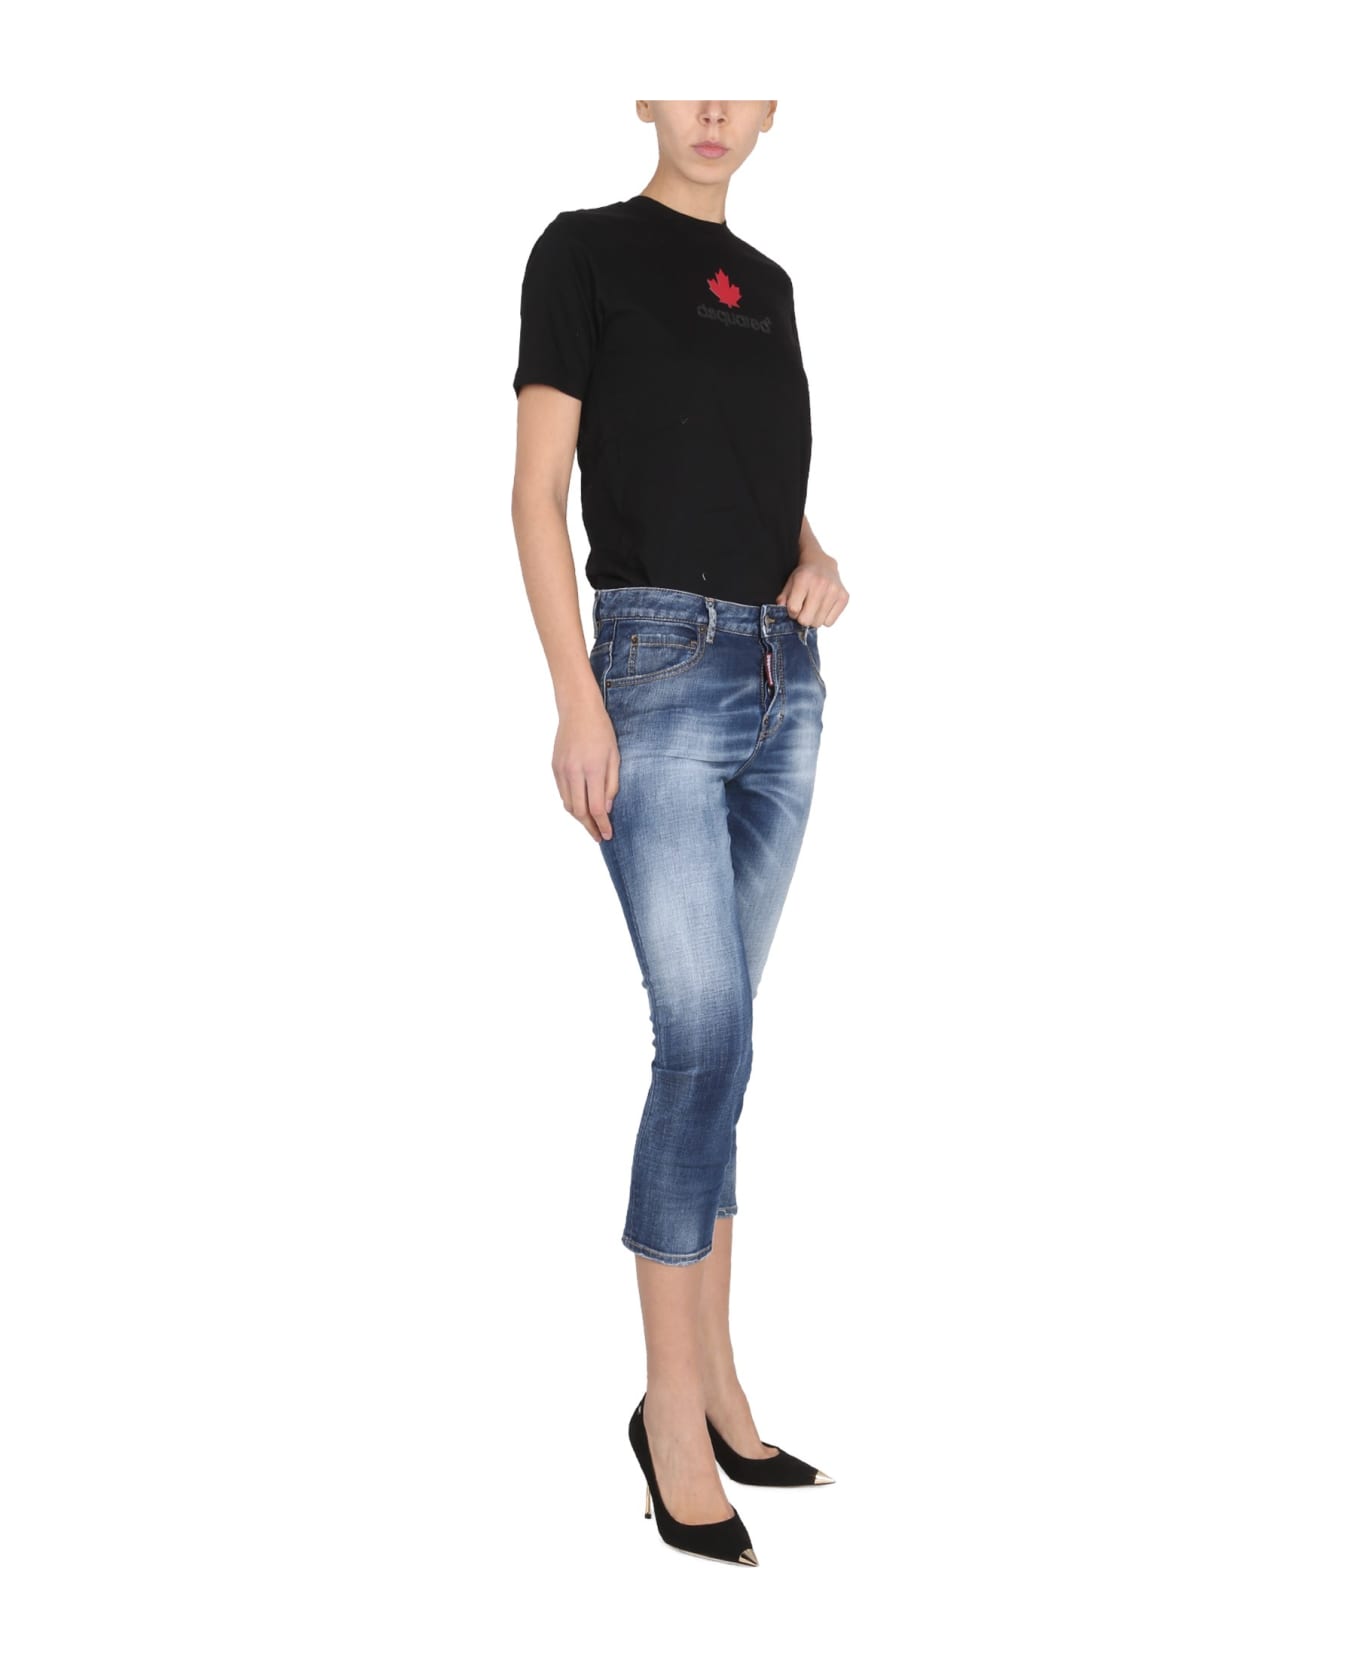 Dsquared2 Cool Girl Cropped Jeans - BLU